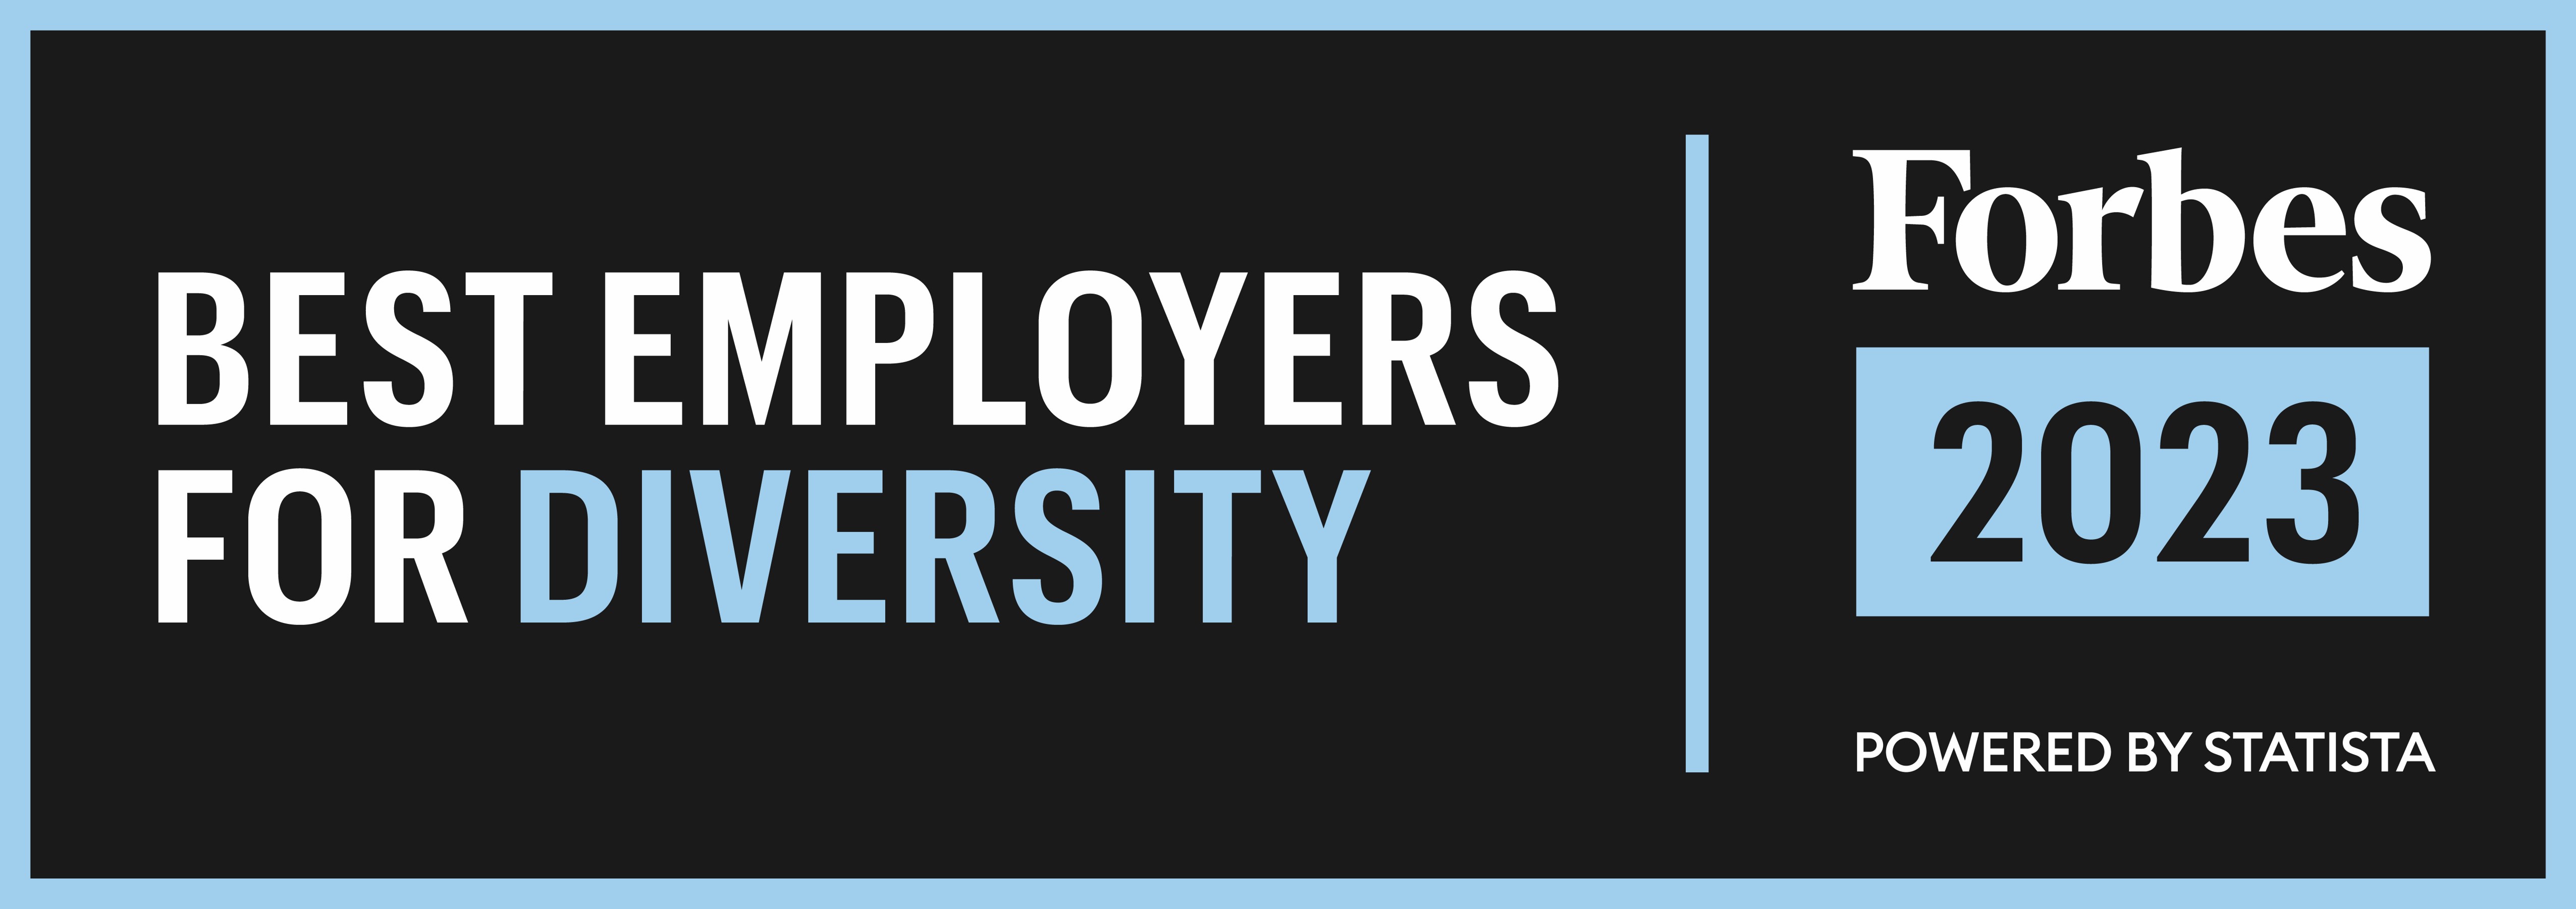 Best Employers for Diversity - Forbes 2023